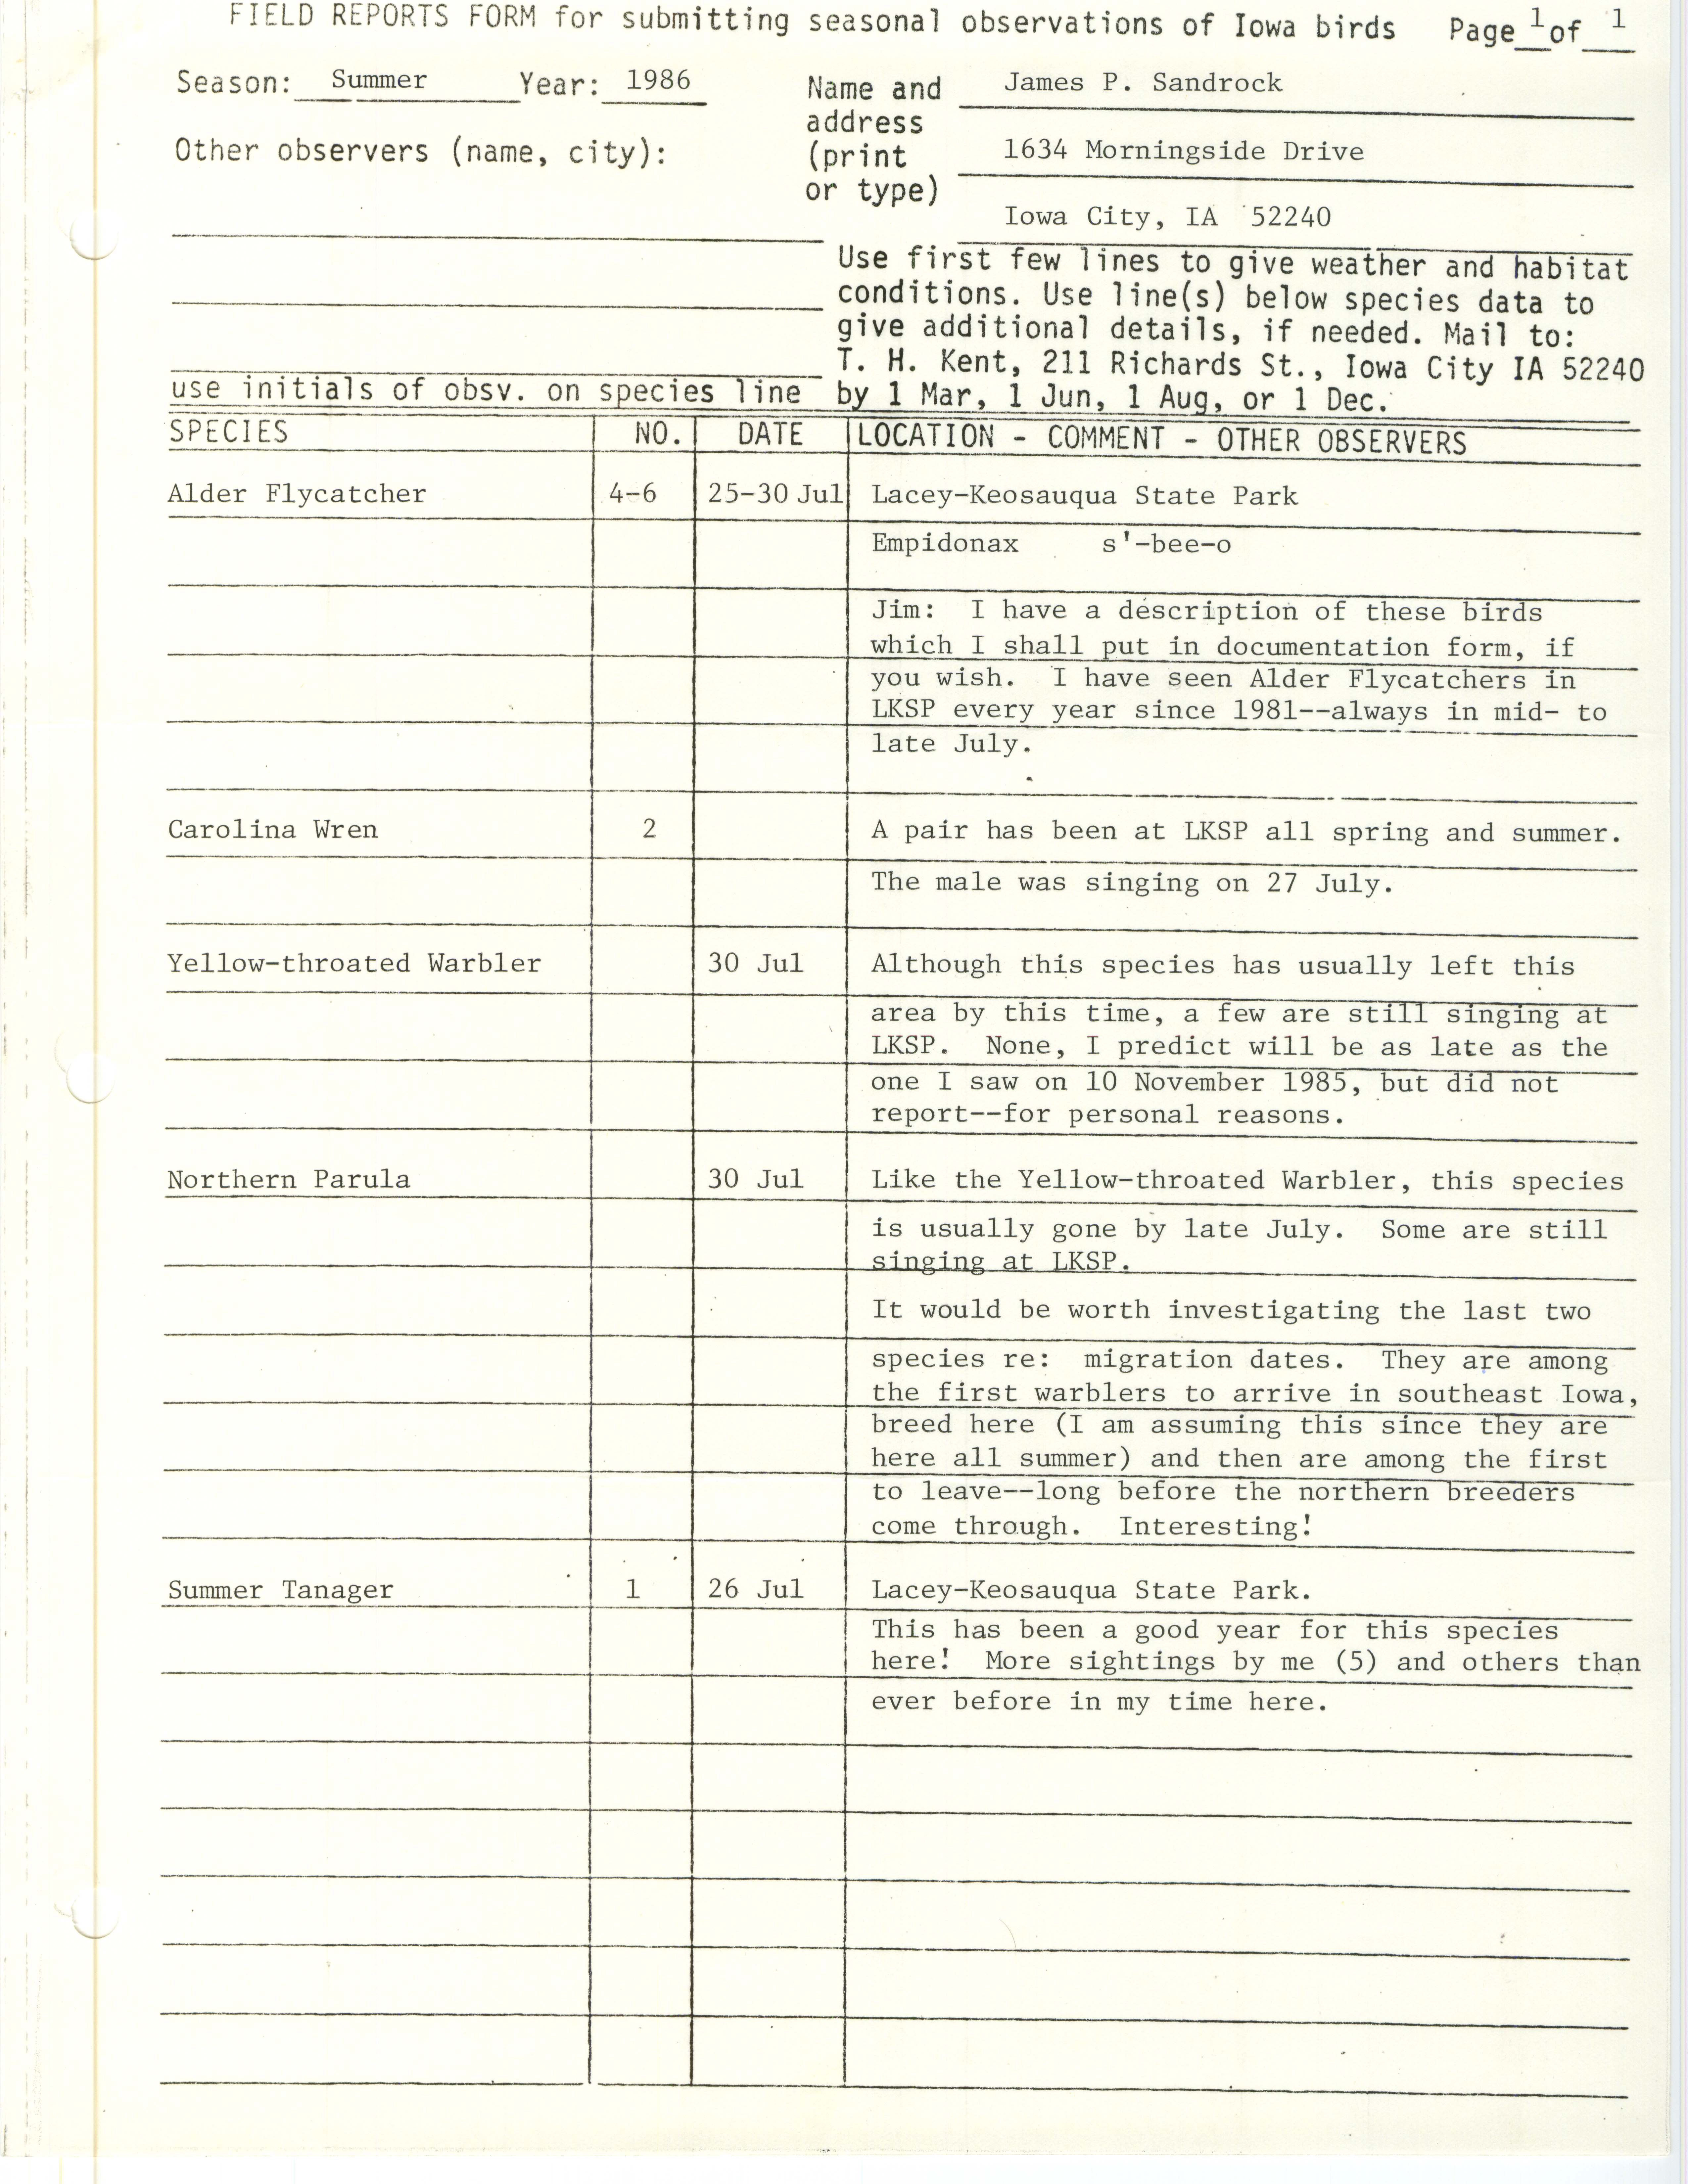 Field reports form for submitting seasonal observations of Iowa birds, James P. Sandrock, summer 1986